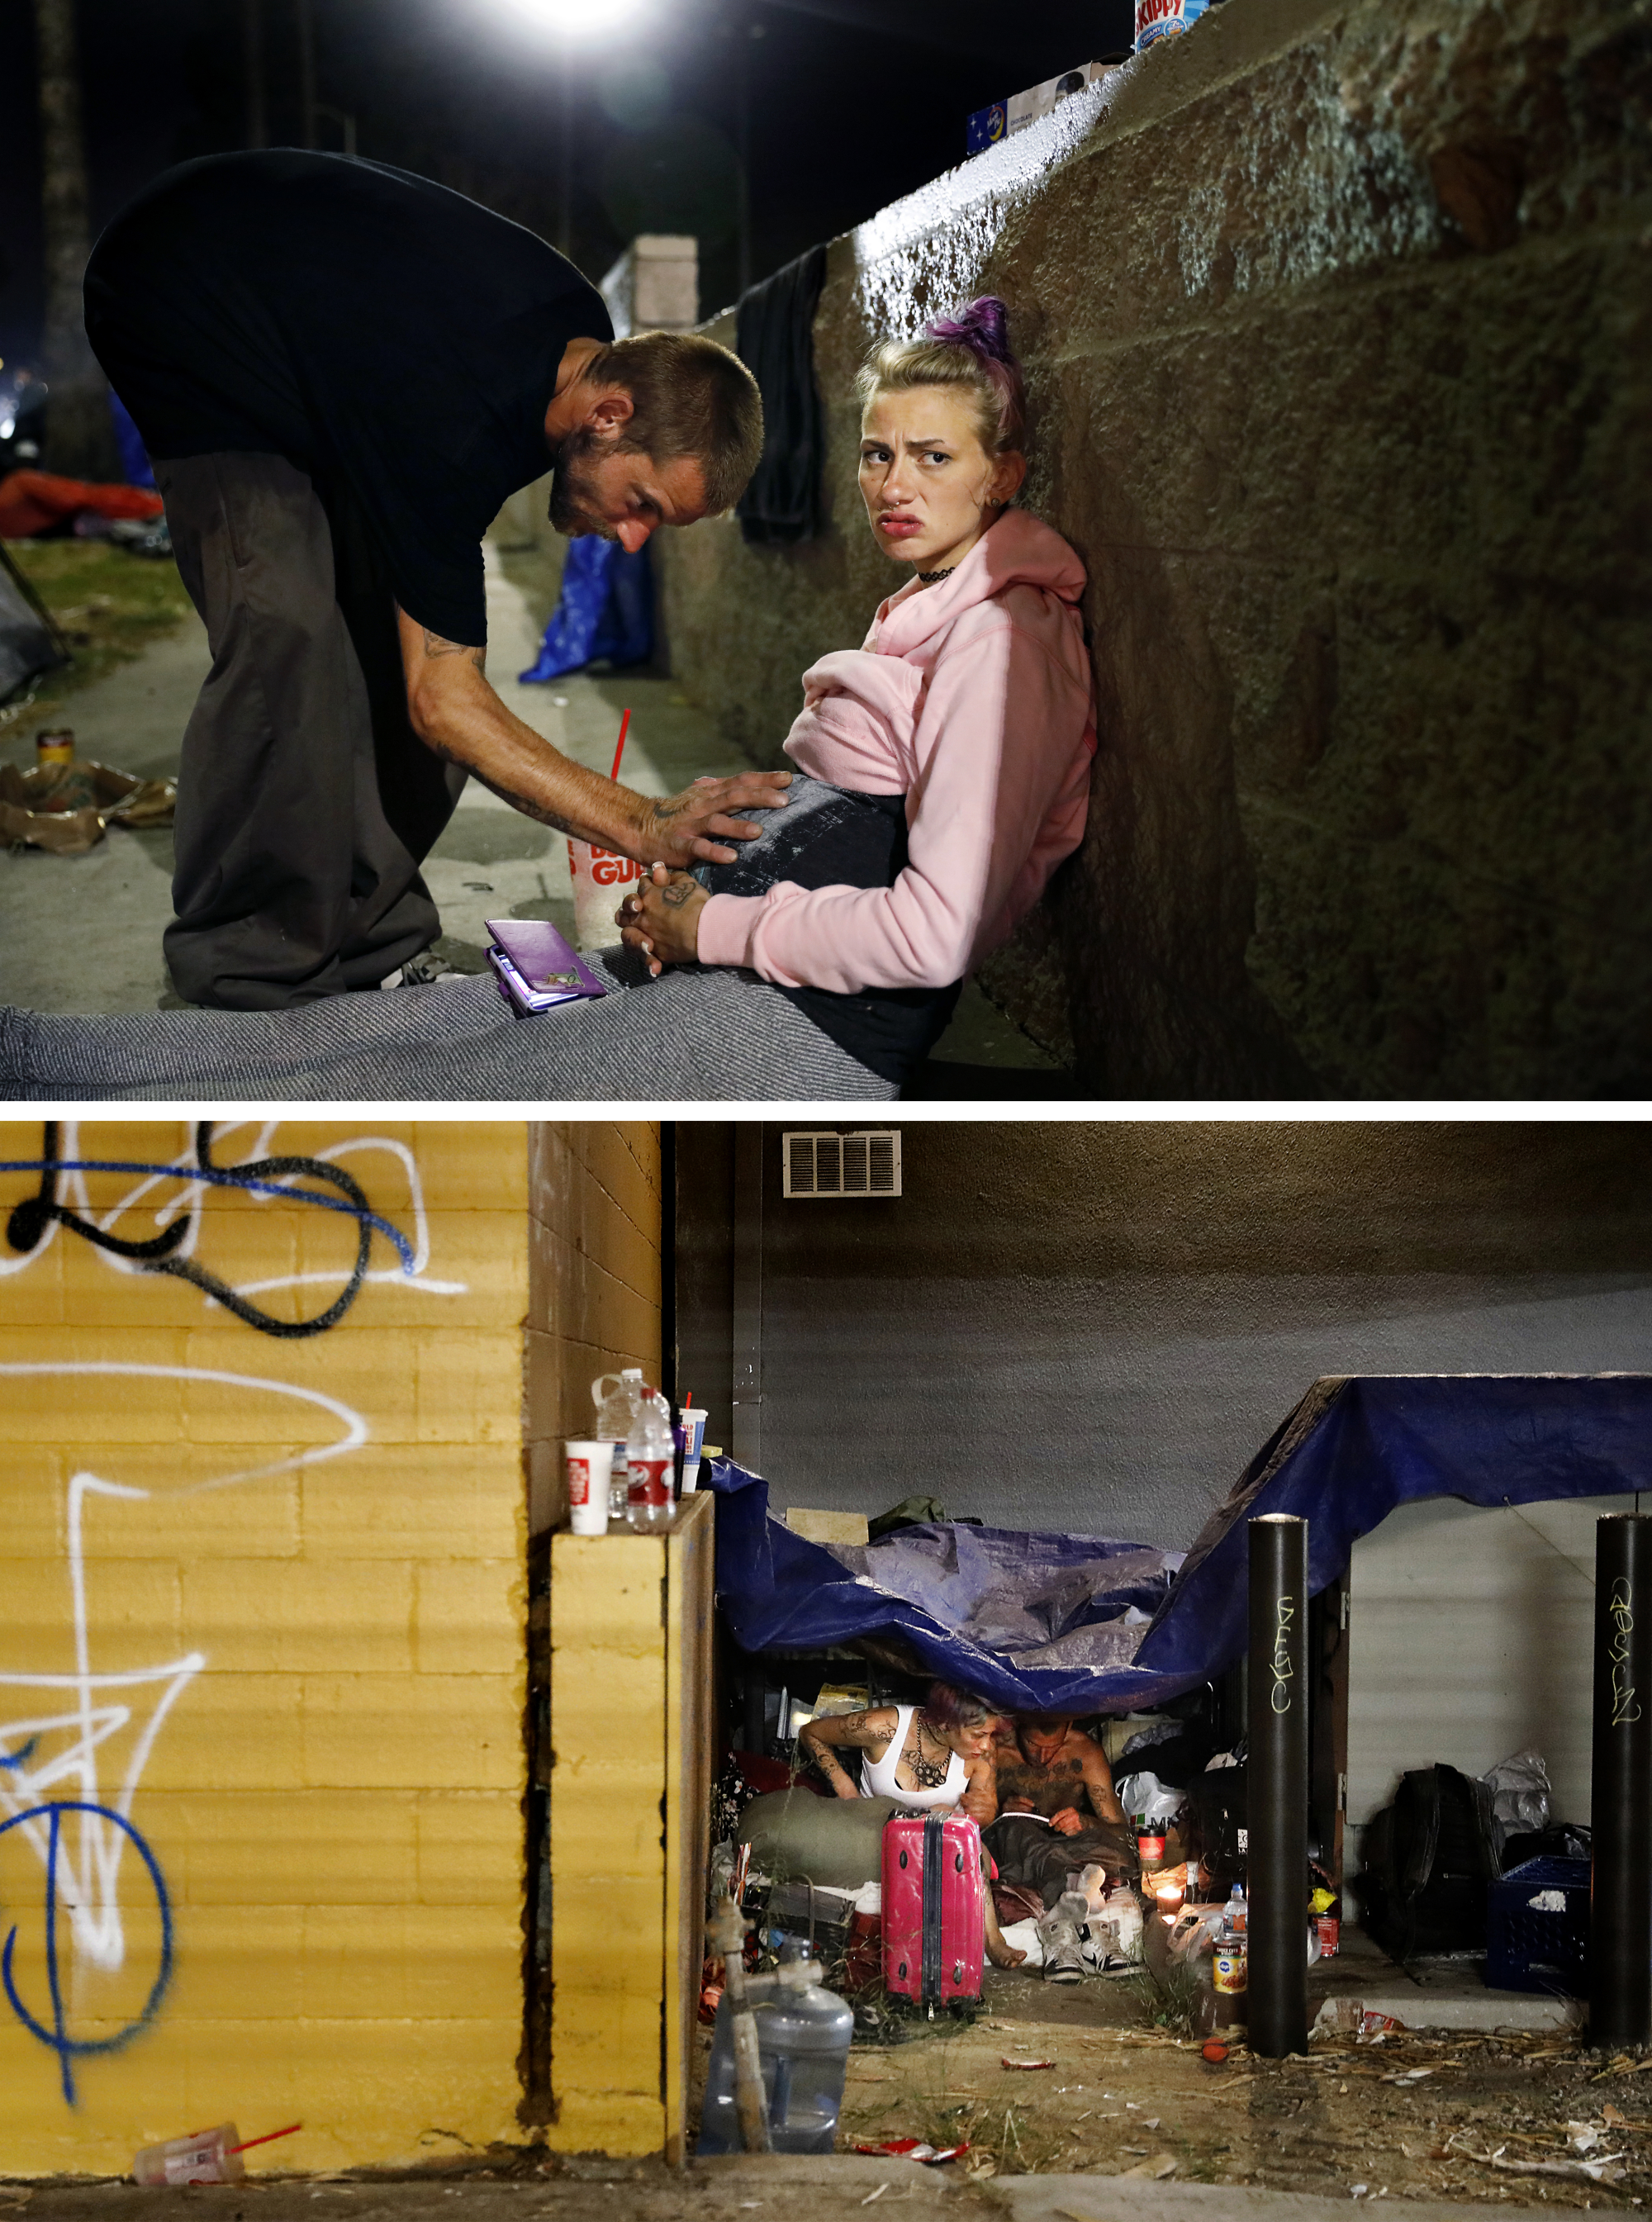 Two photos: A woman sits against a wall as a man touches her pregnant belly. A woman and man sit under a tarp in an alleyway.